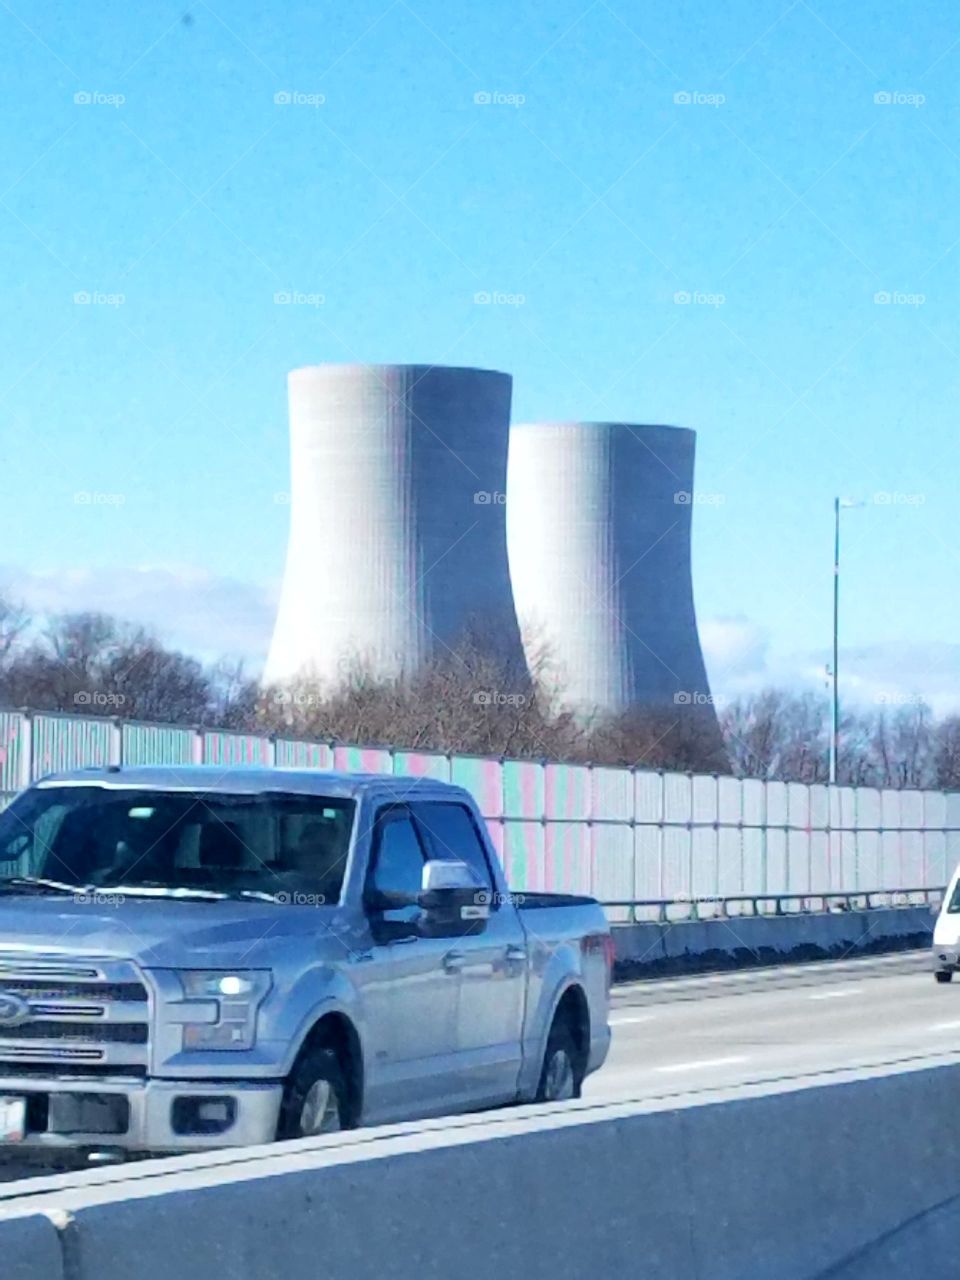 Nuclear power plant two Cooling Towers as seen from highway.